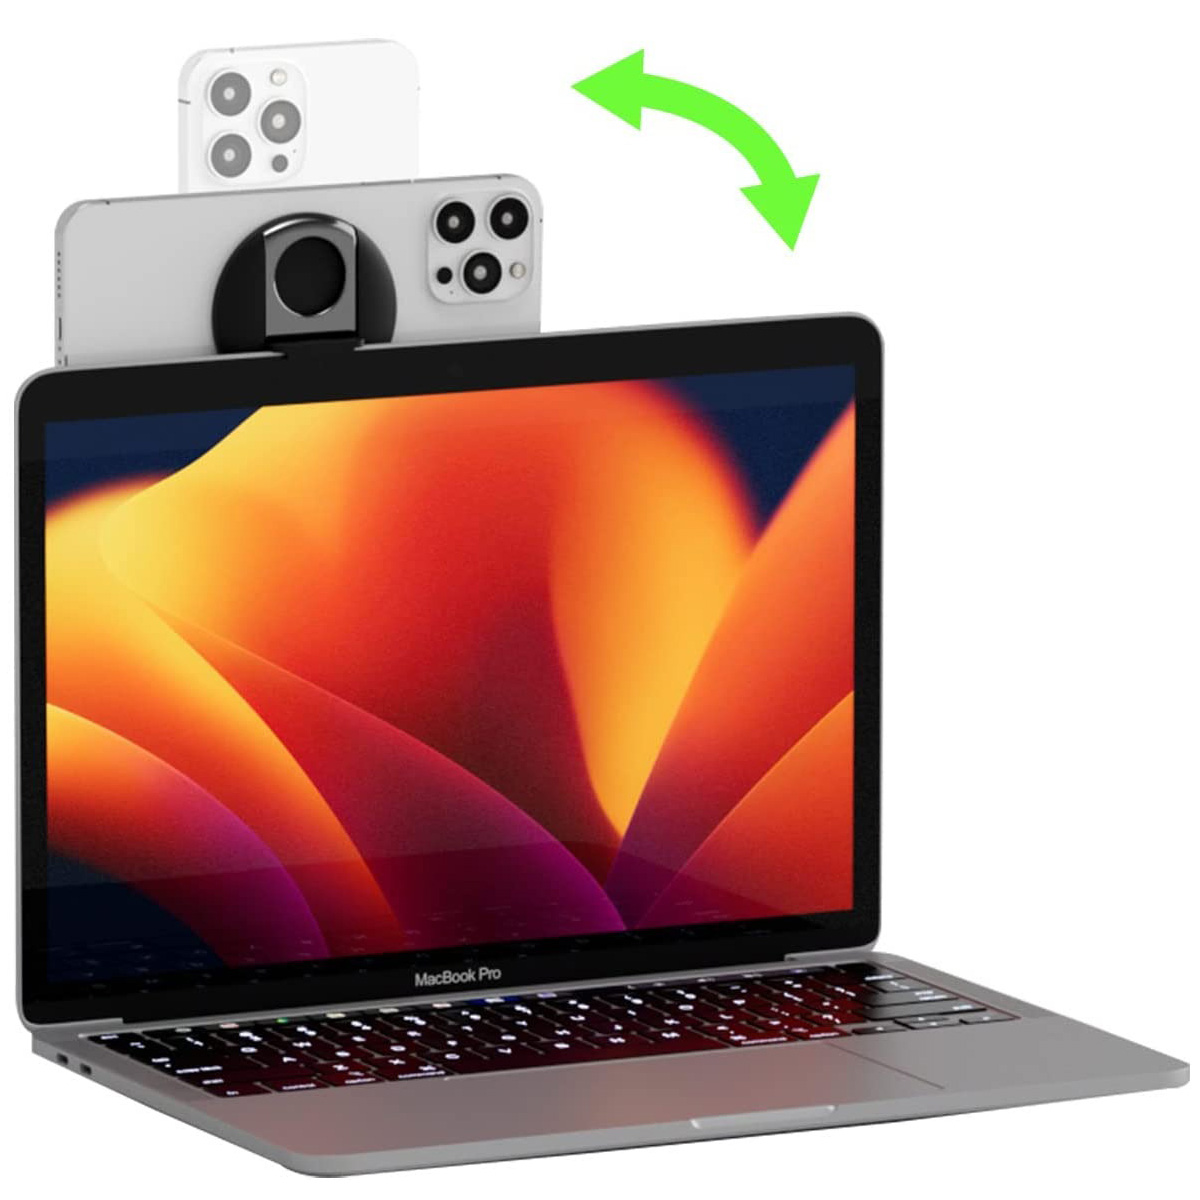 iPhone Mount with MagSafe for Mac Notebooks